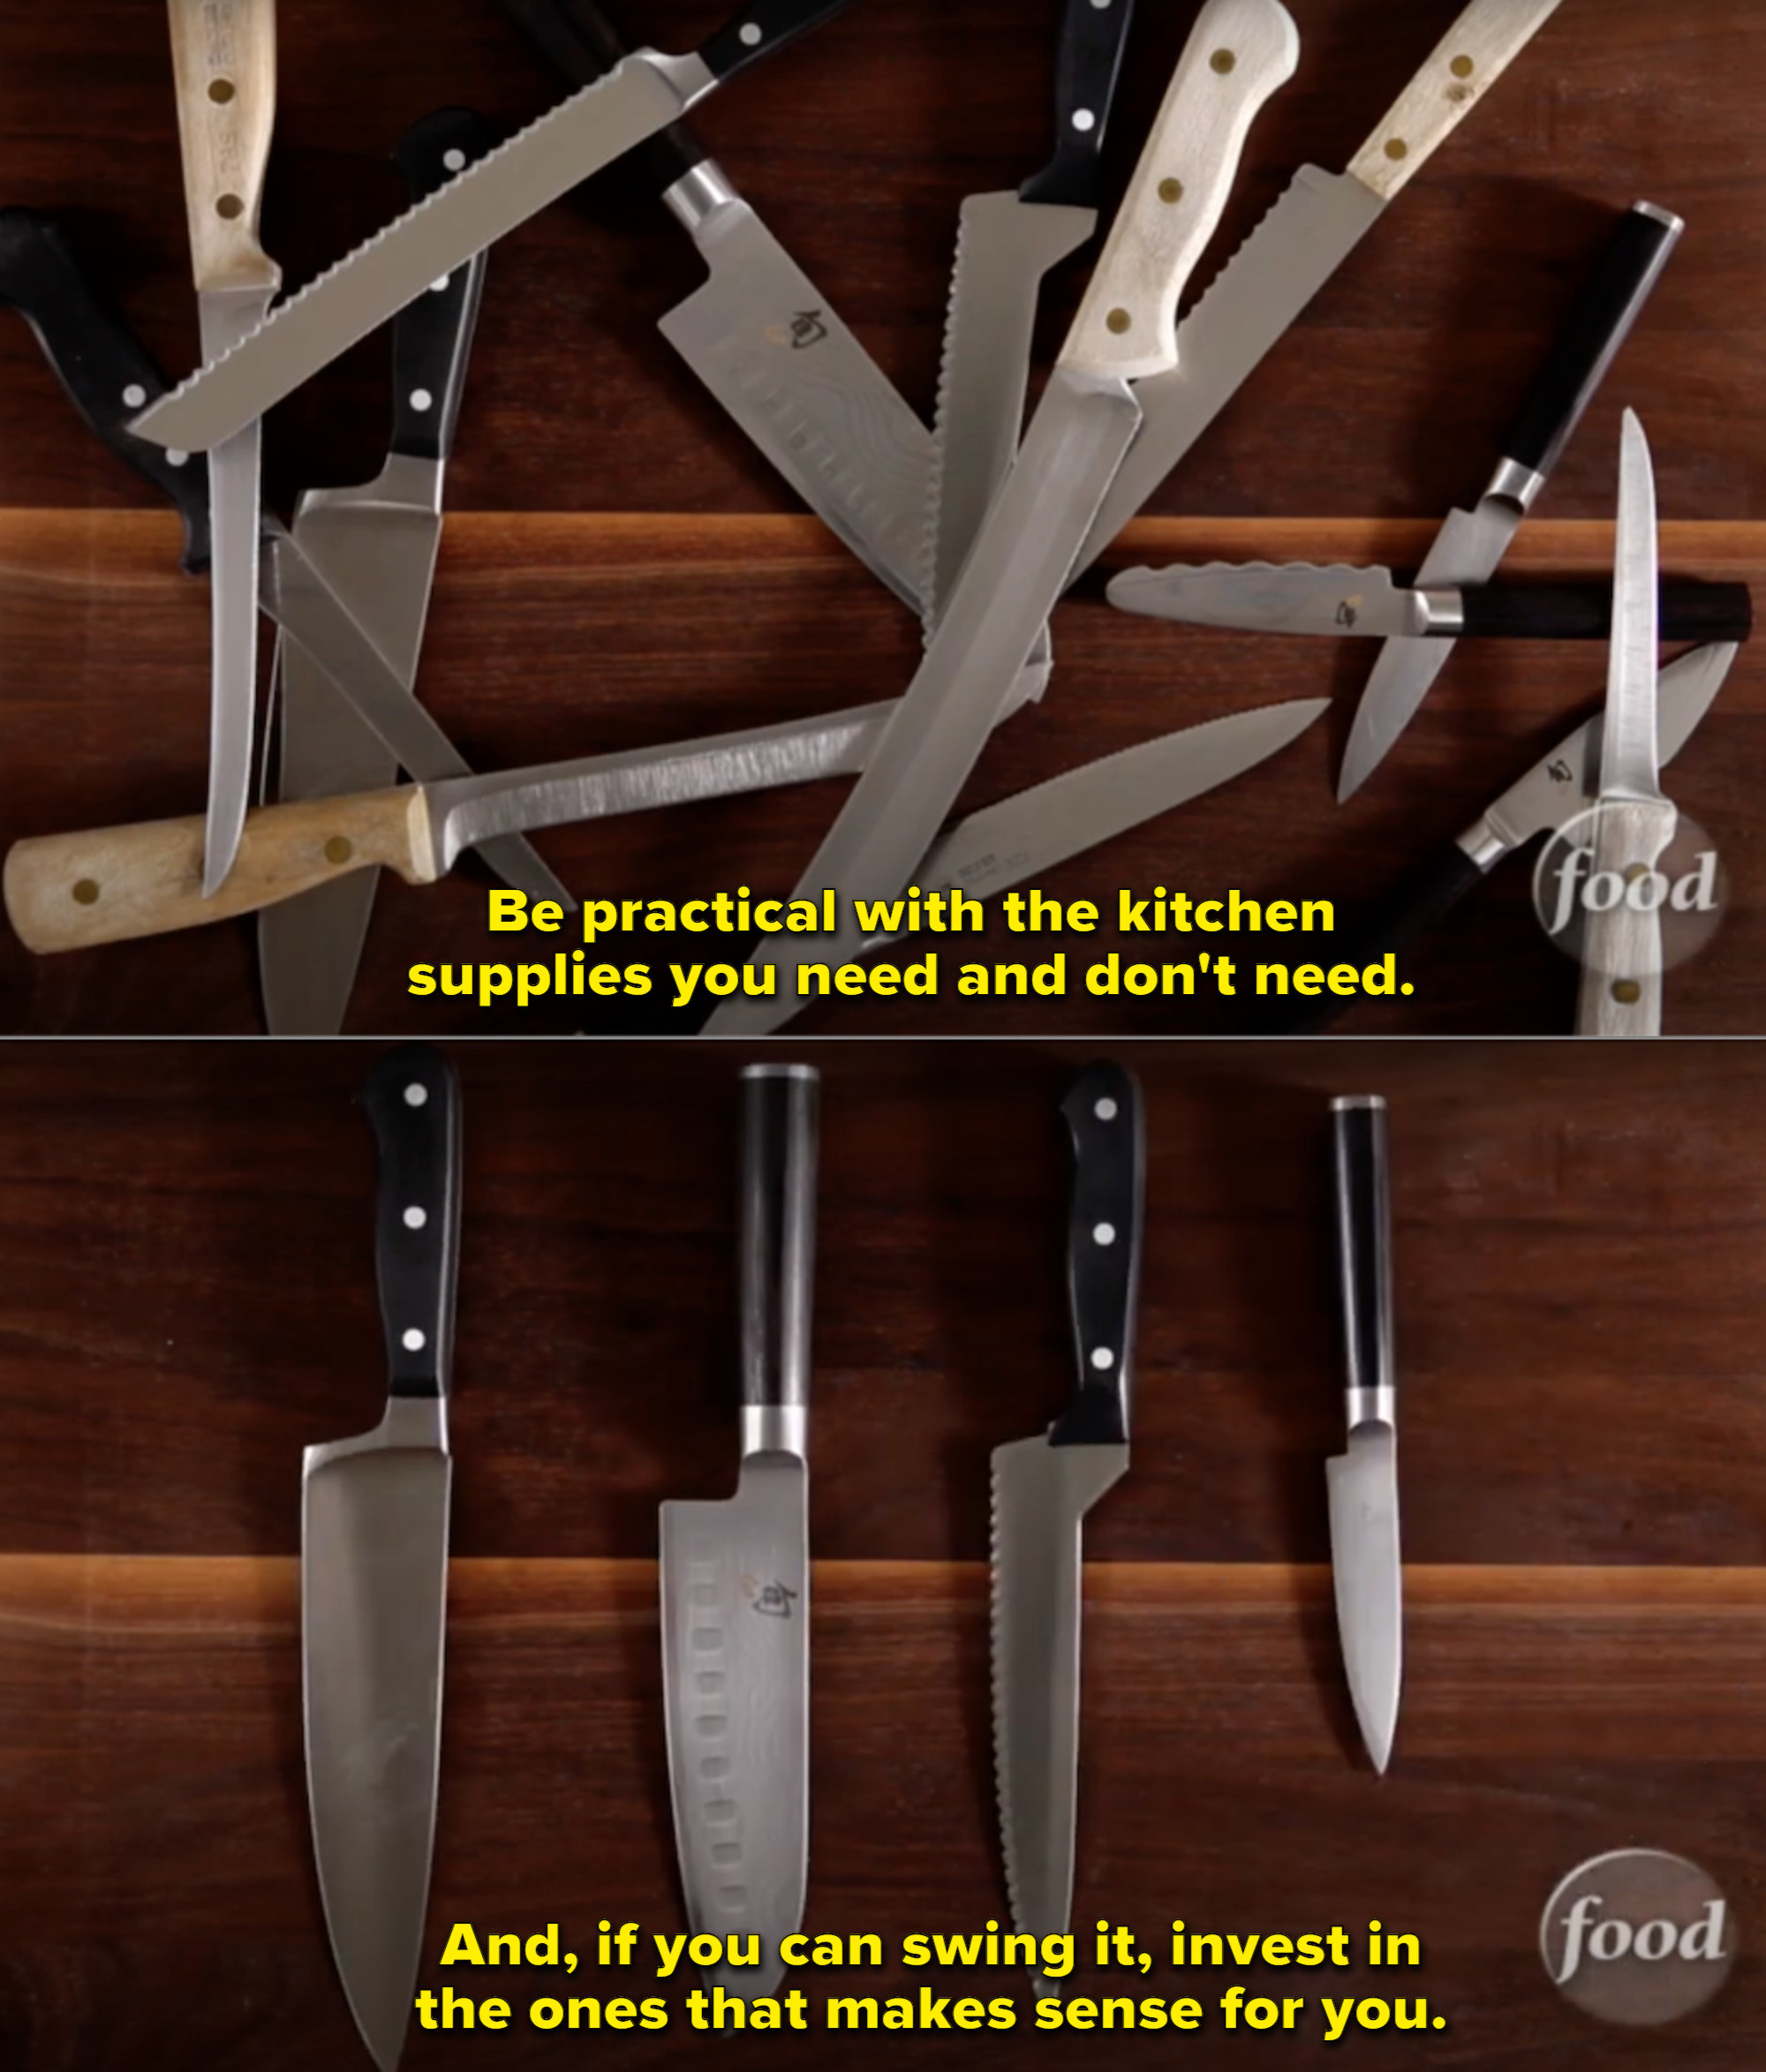 A bunch of knifes on a cutting board